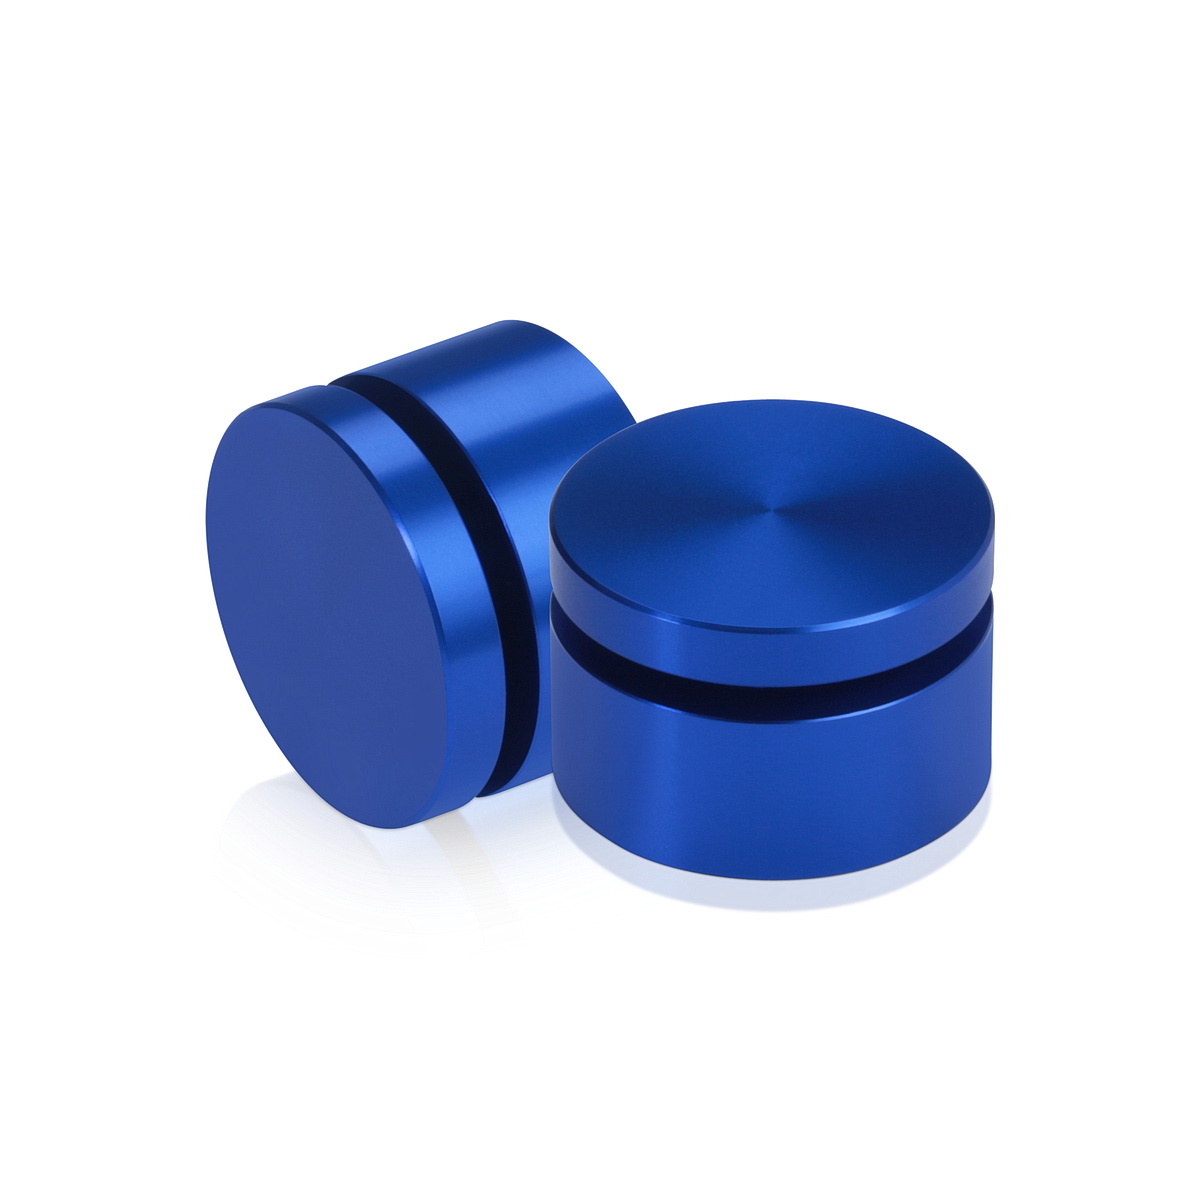 1-1/4'' Diameter X 1/2'' Barrel Length, Affordable Aluminum Standoffs, Blue Anodized Finish Easy Fasten Standoff (For Inside / Outside use) [Required Material Hole Size: 7/16'']